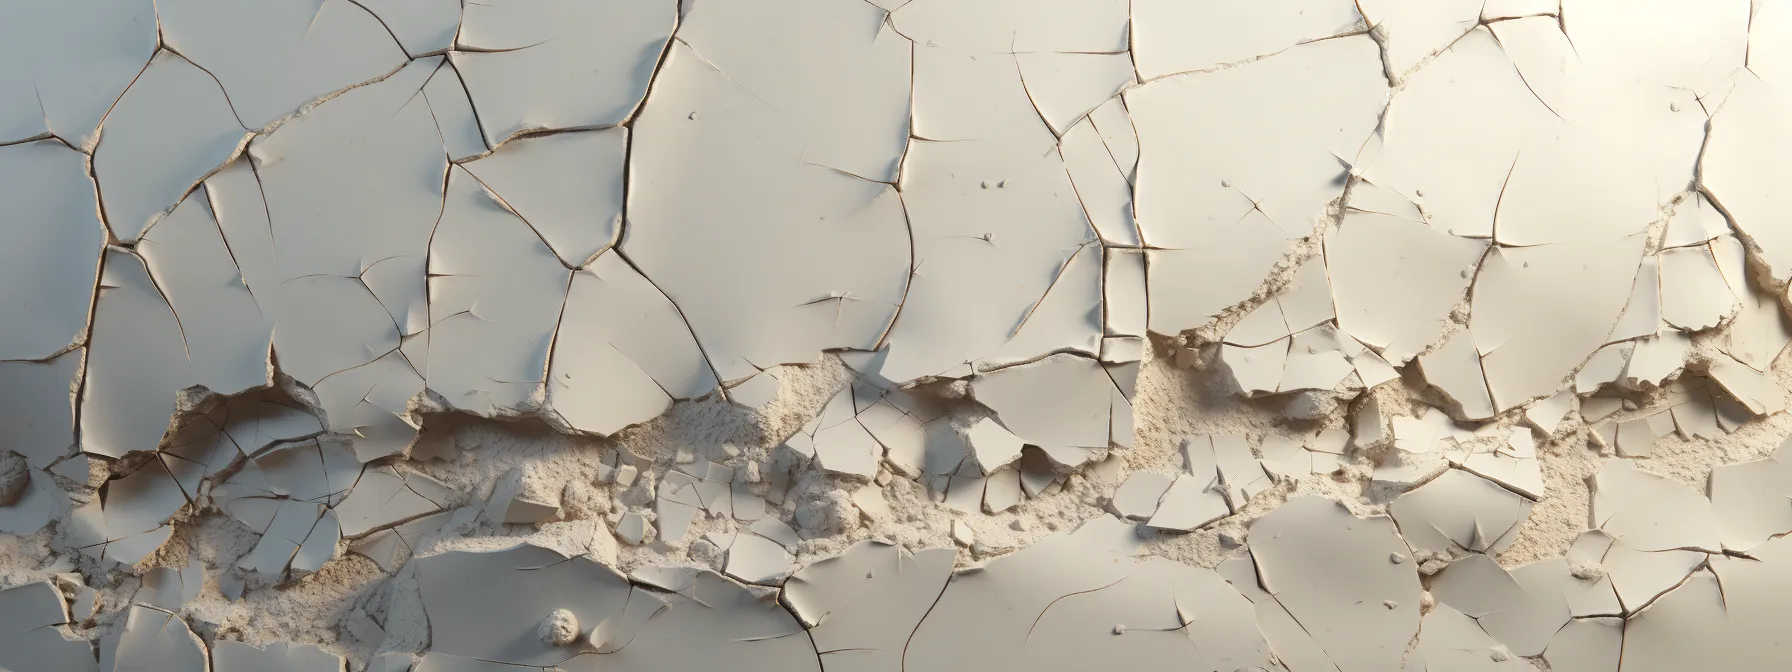 a close-up of a damaged drywall with visible cracks and holes.